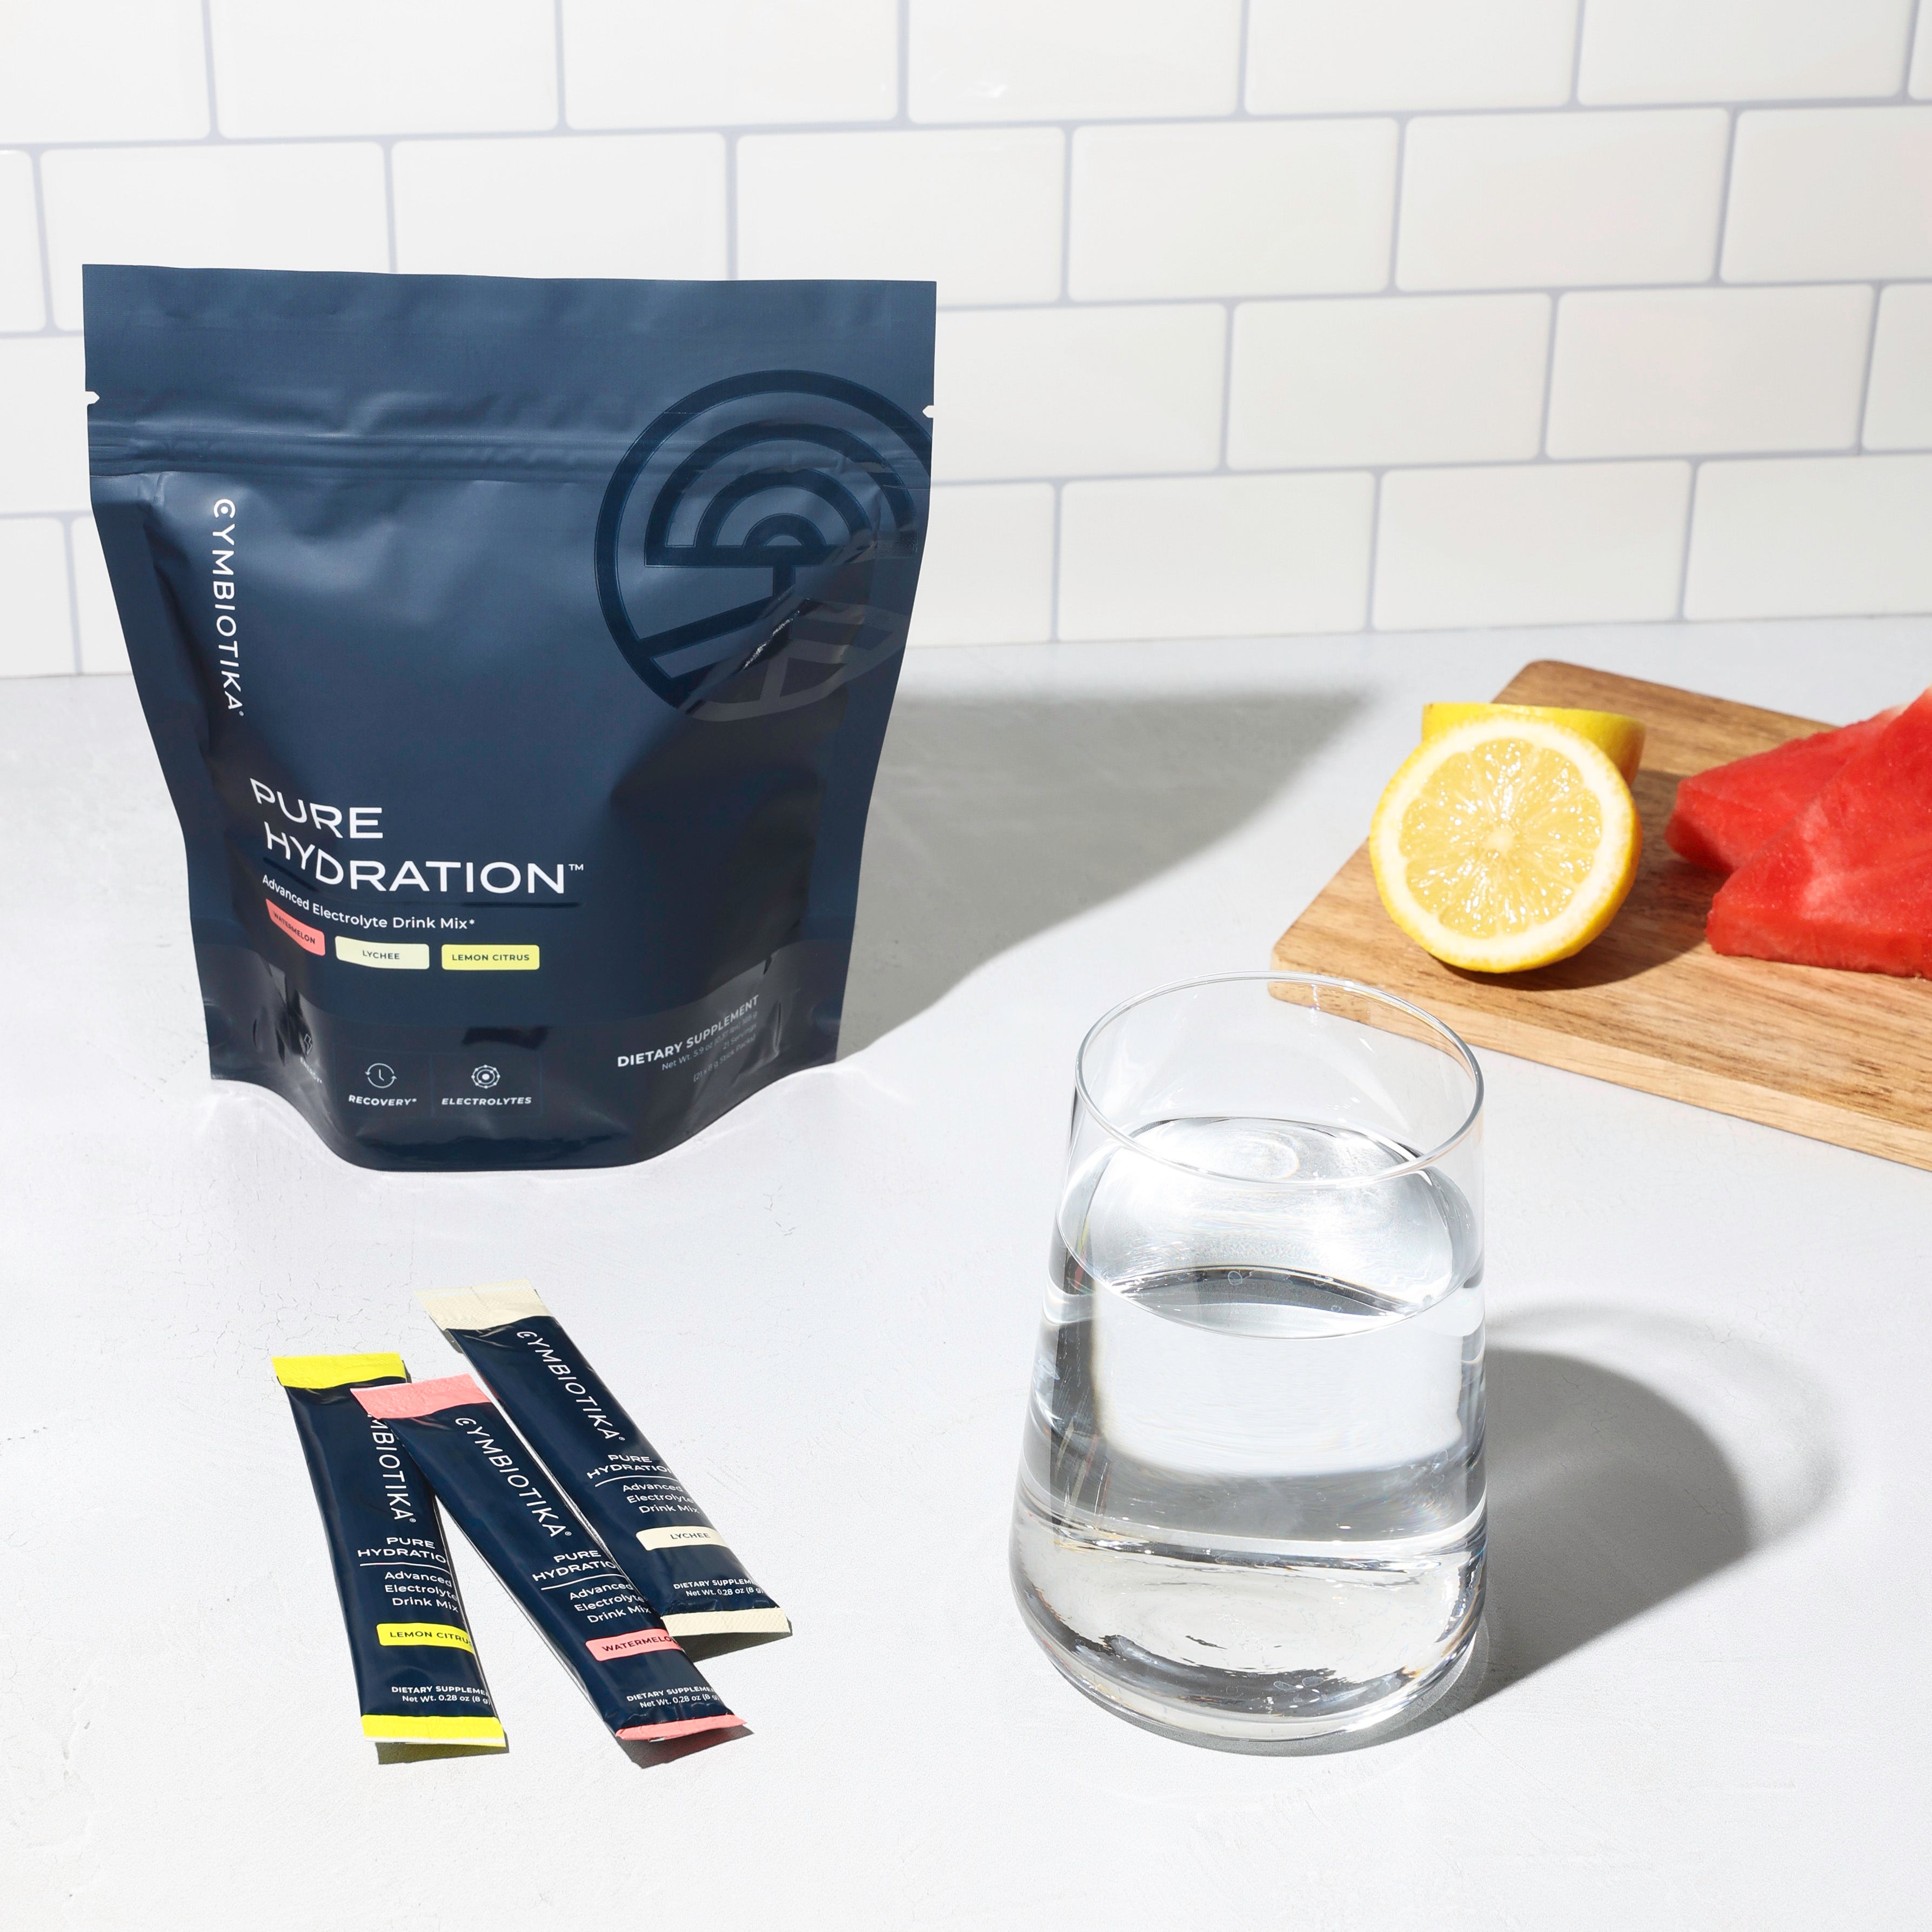 Pure Hydration bag with Pure Hydration packets on a kitchen counter